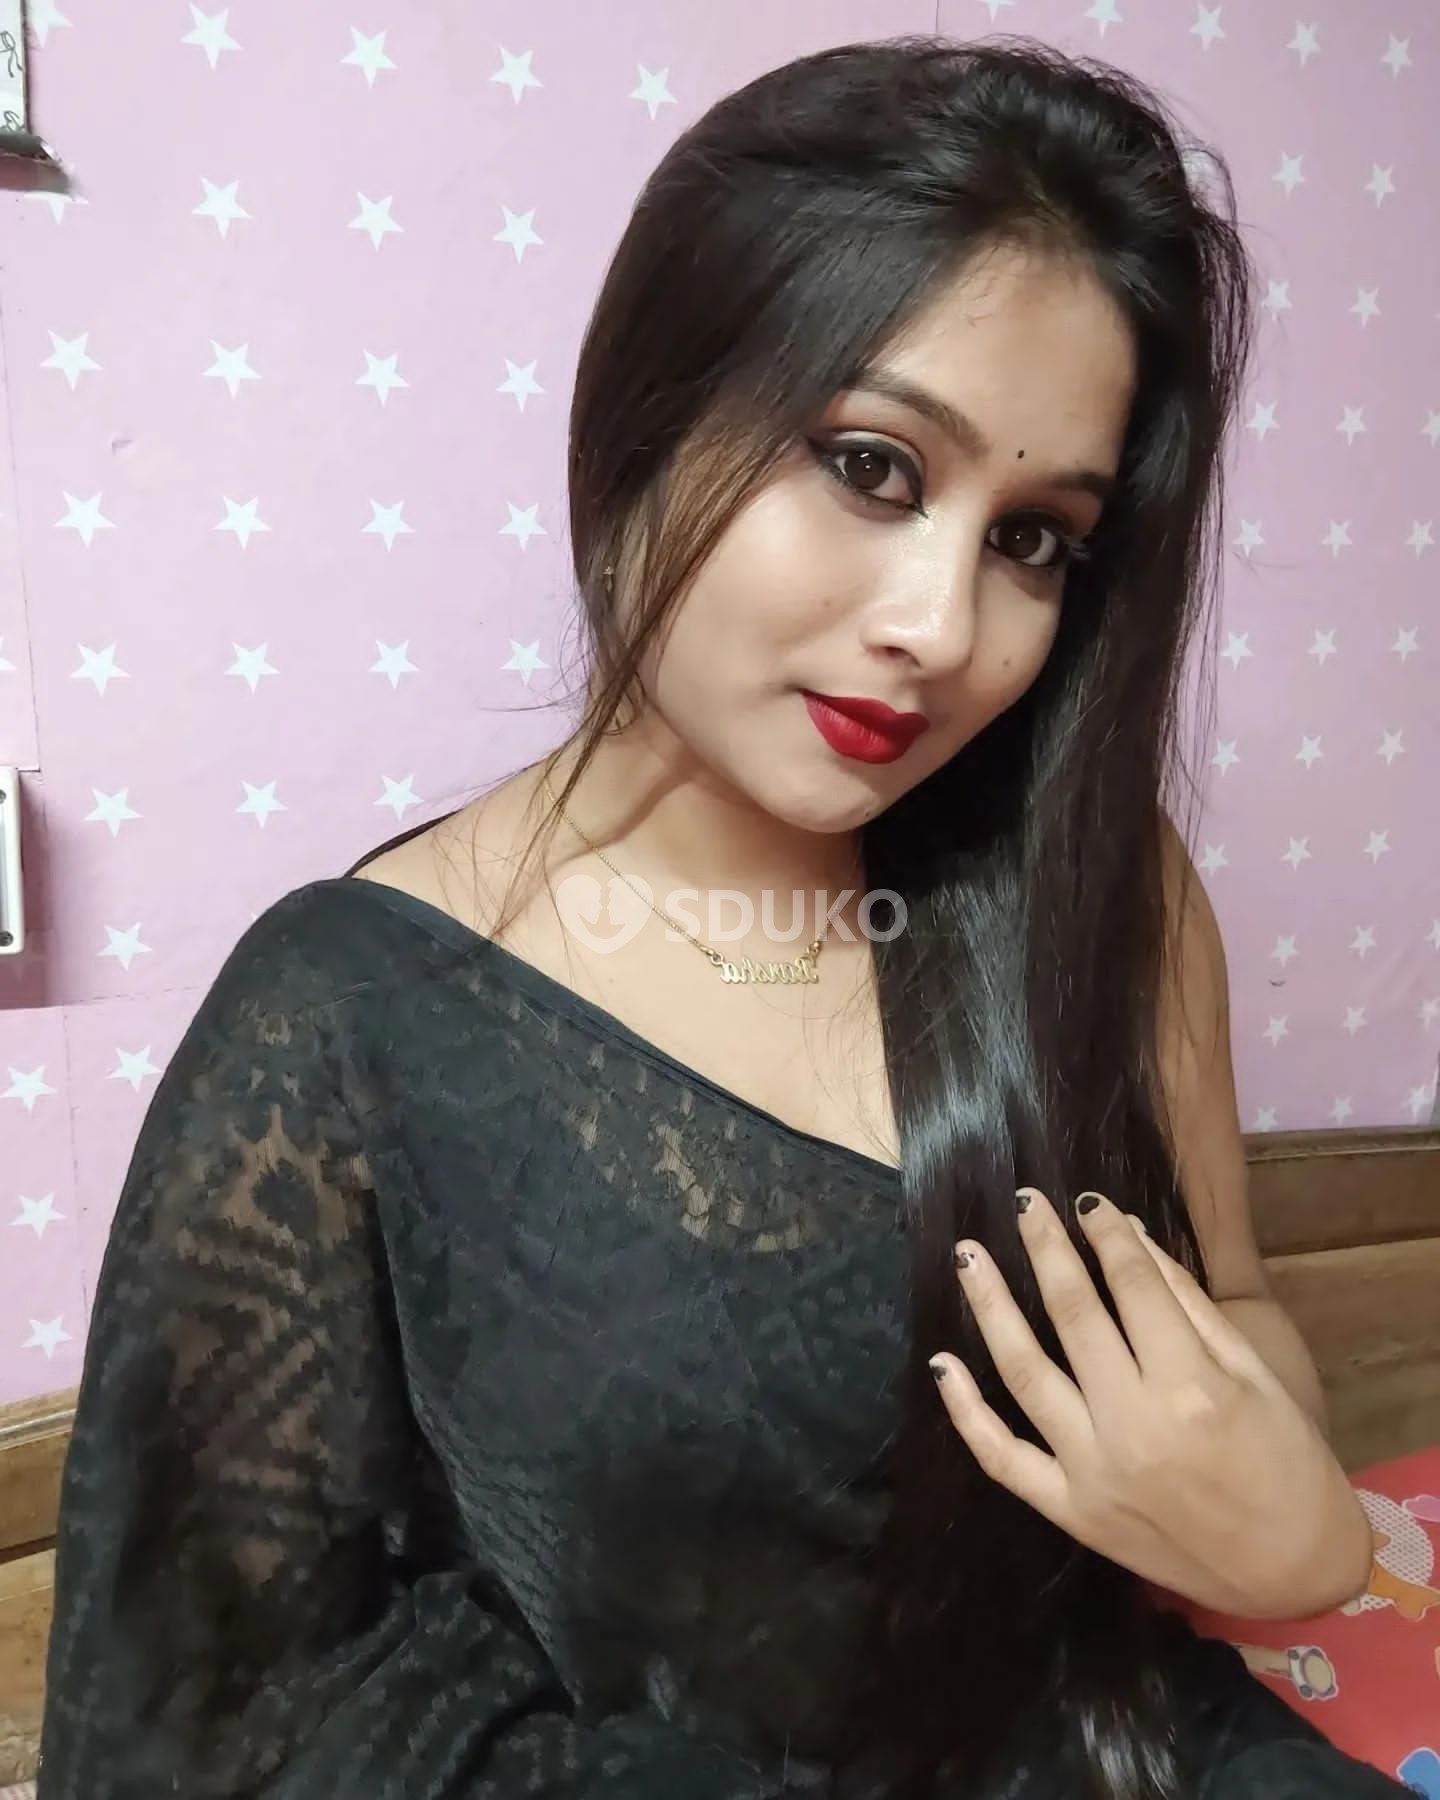 Madurai//***🆑 TODAY LOW PRICE 100% SAFE AND SECURE GENUINE CALL GIRL AFFORDABLE PRICE CALL NOW 24/7 AVAILABLE ANYTIME